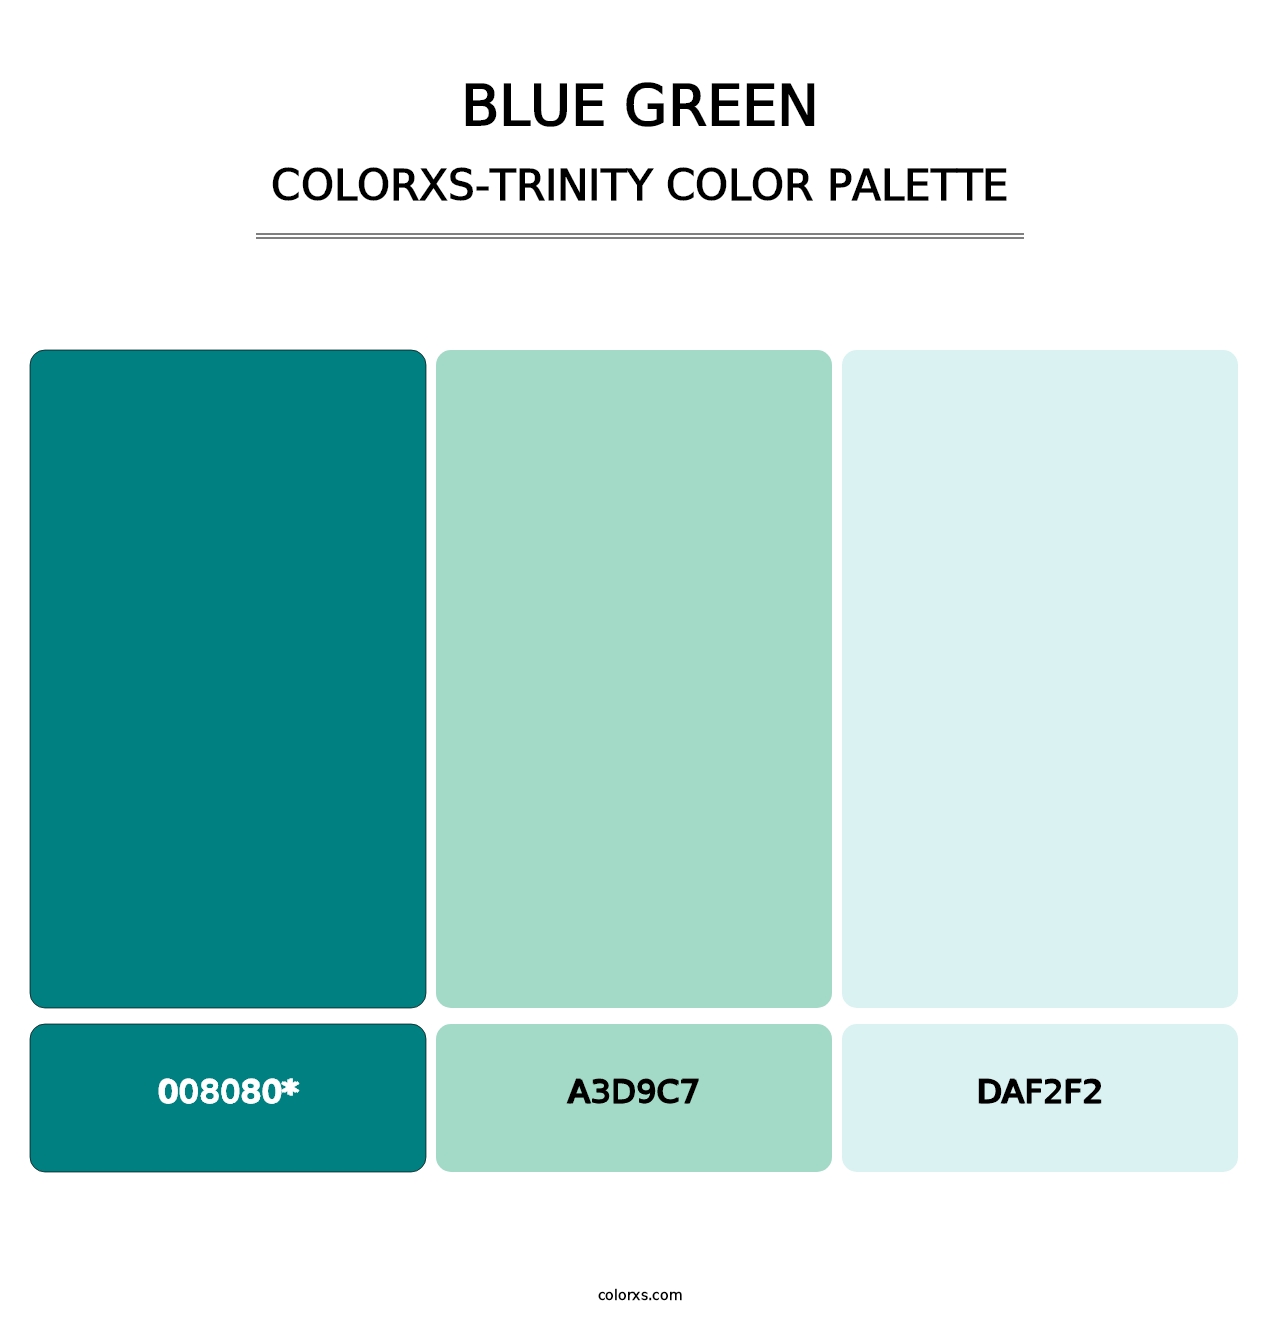 Blue Green - Colorxs Trinity Palette